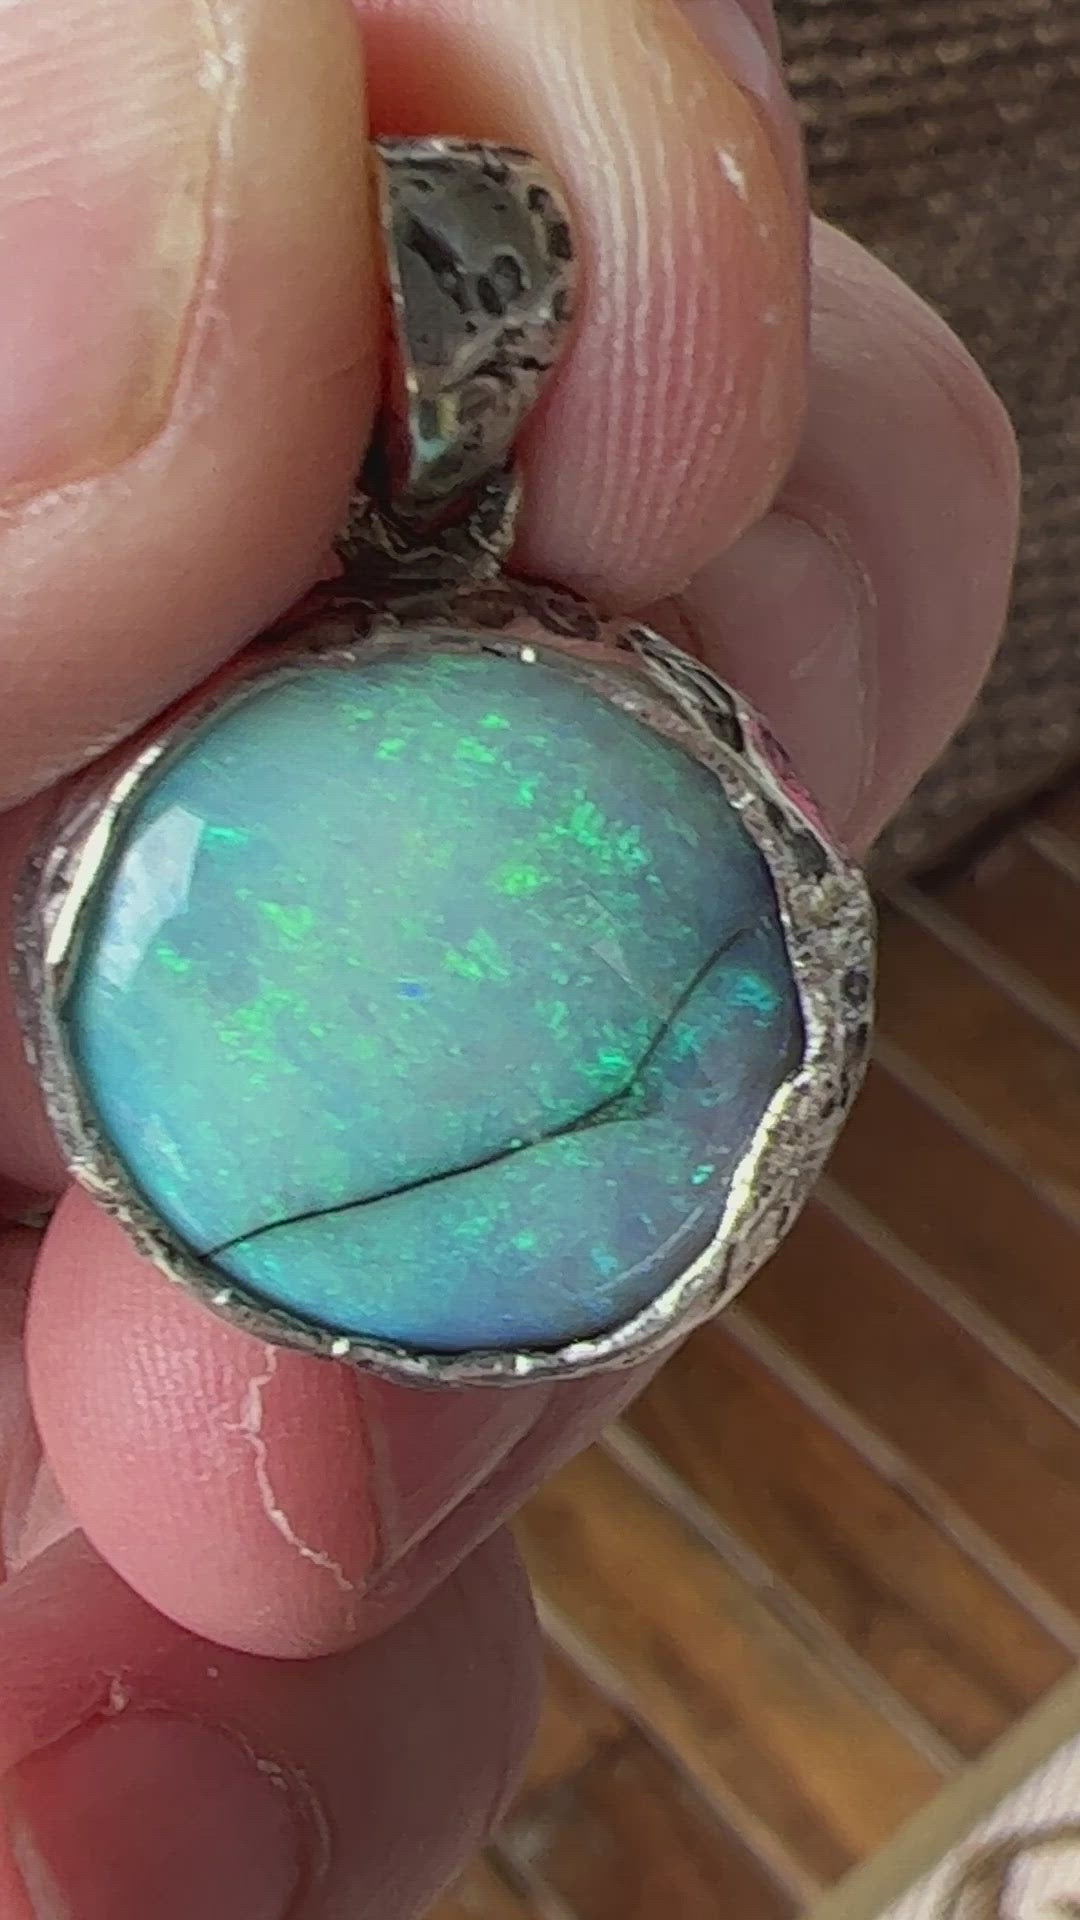 Awesome Lightning Ridge picture stone opal. Mounted with Argentium silver which shows off the stone perfectly. A beautiful design by Sally Fisher. 